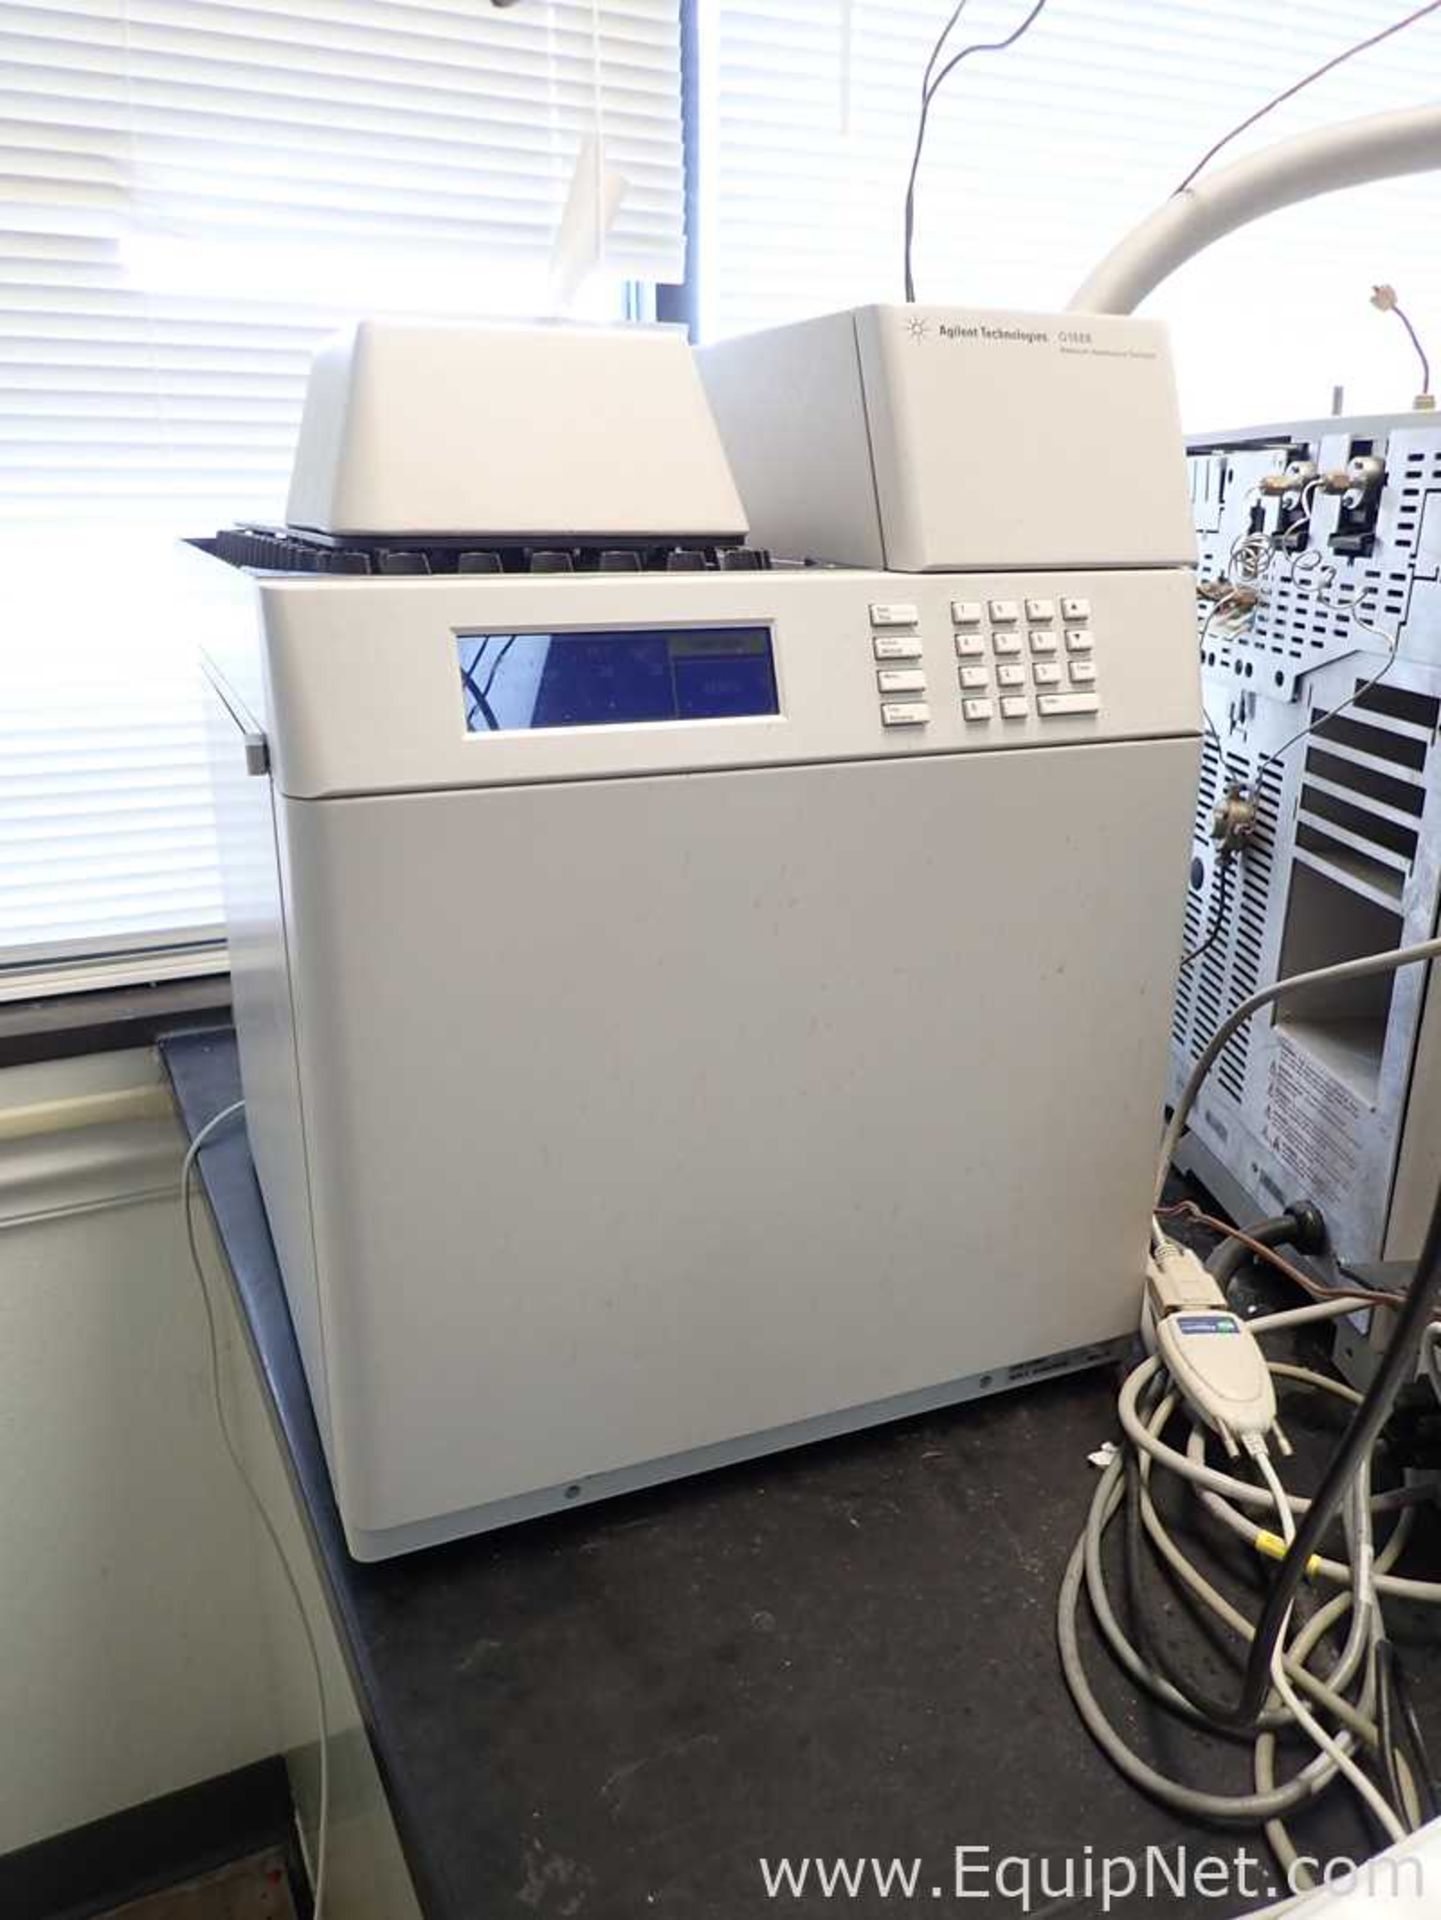 Agilent Technologies 6890 GC with 7693 AS, G4513A Injector, and G1888 Headspace Autosampler - Image 7 of 12